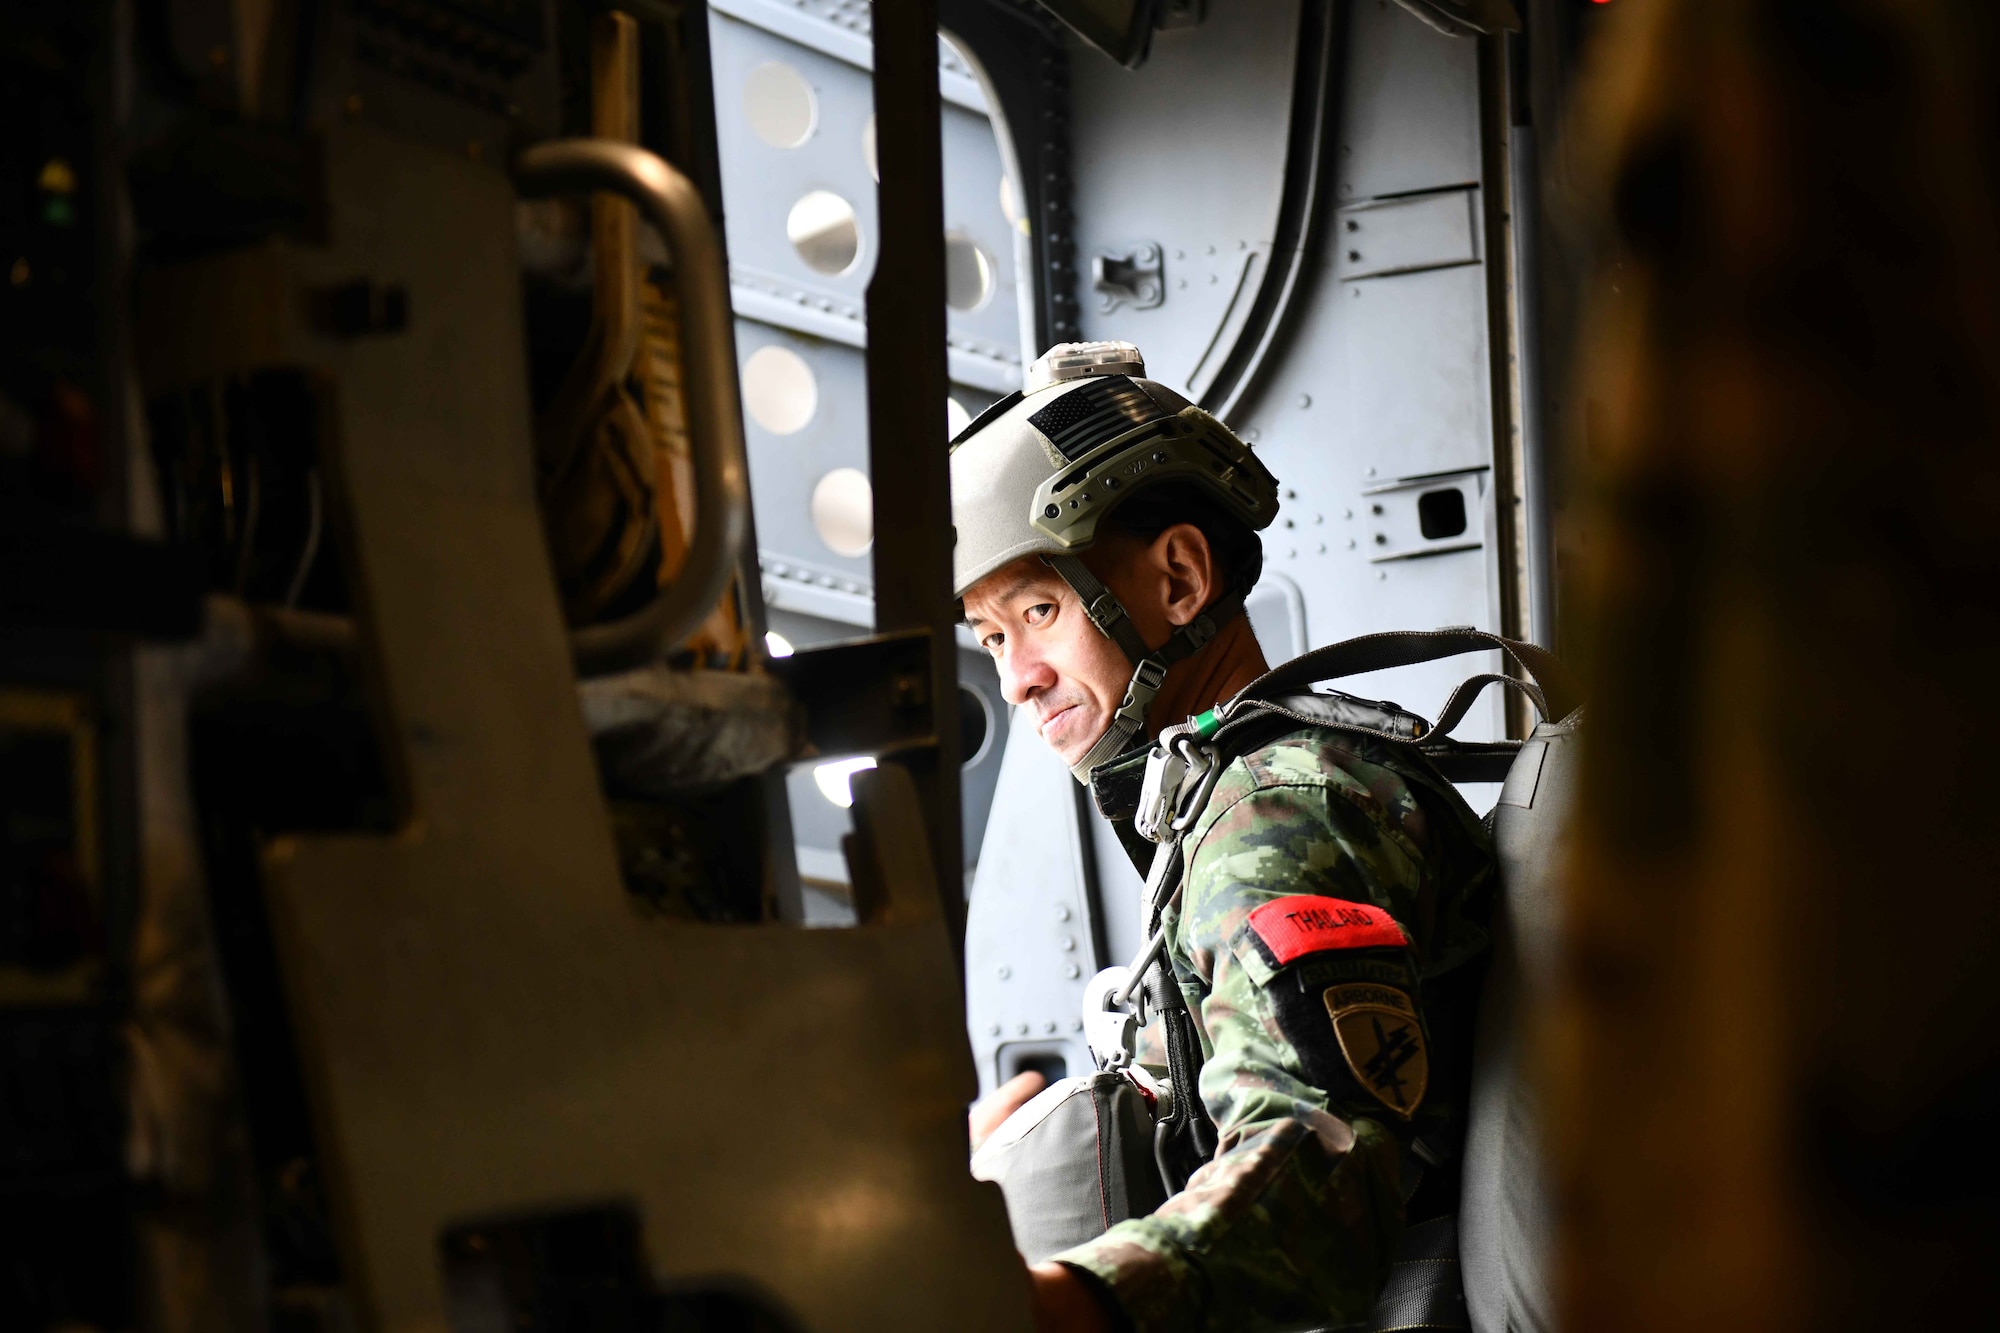 A jumpmaster from the Royal Thai Army waits at the door of a C-17 Globemaster III from the 58th Airlift Squadron based out of Altus Air Force Base, Oklahoma, as it flies closer to the Sicily Drop Zone near Fayetteville, North Carolina, Dec. 9, 2022. Operation Toy Drop was an opportunity for the U.S. military to work and train alongside partner nations including Thailand, Great Britain, Poland, France, Greece, Italy, Ireland, Romania, and the Ivory Coast. (U.S. Air Force photos by Airman 1st Class Kari Degraffenreed)